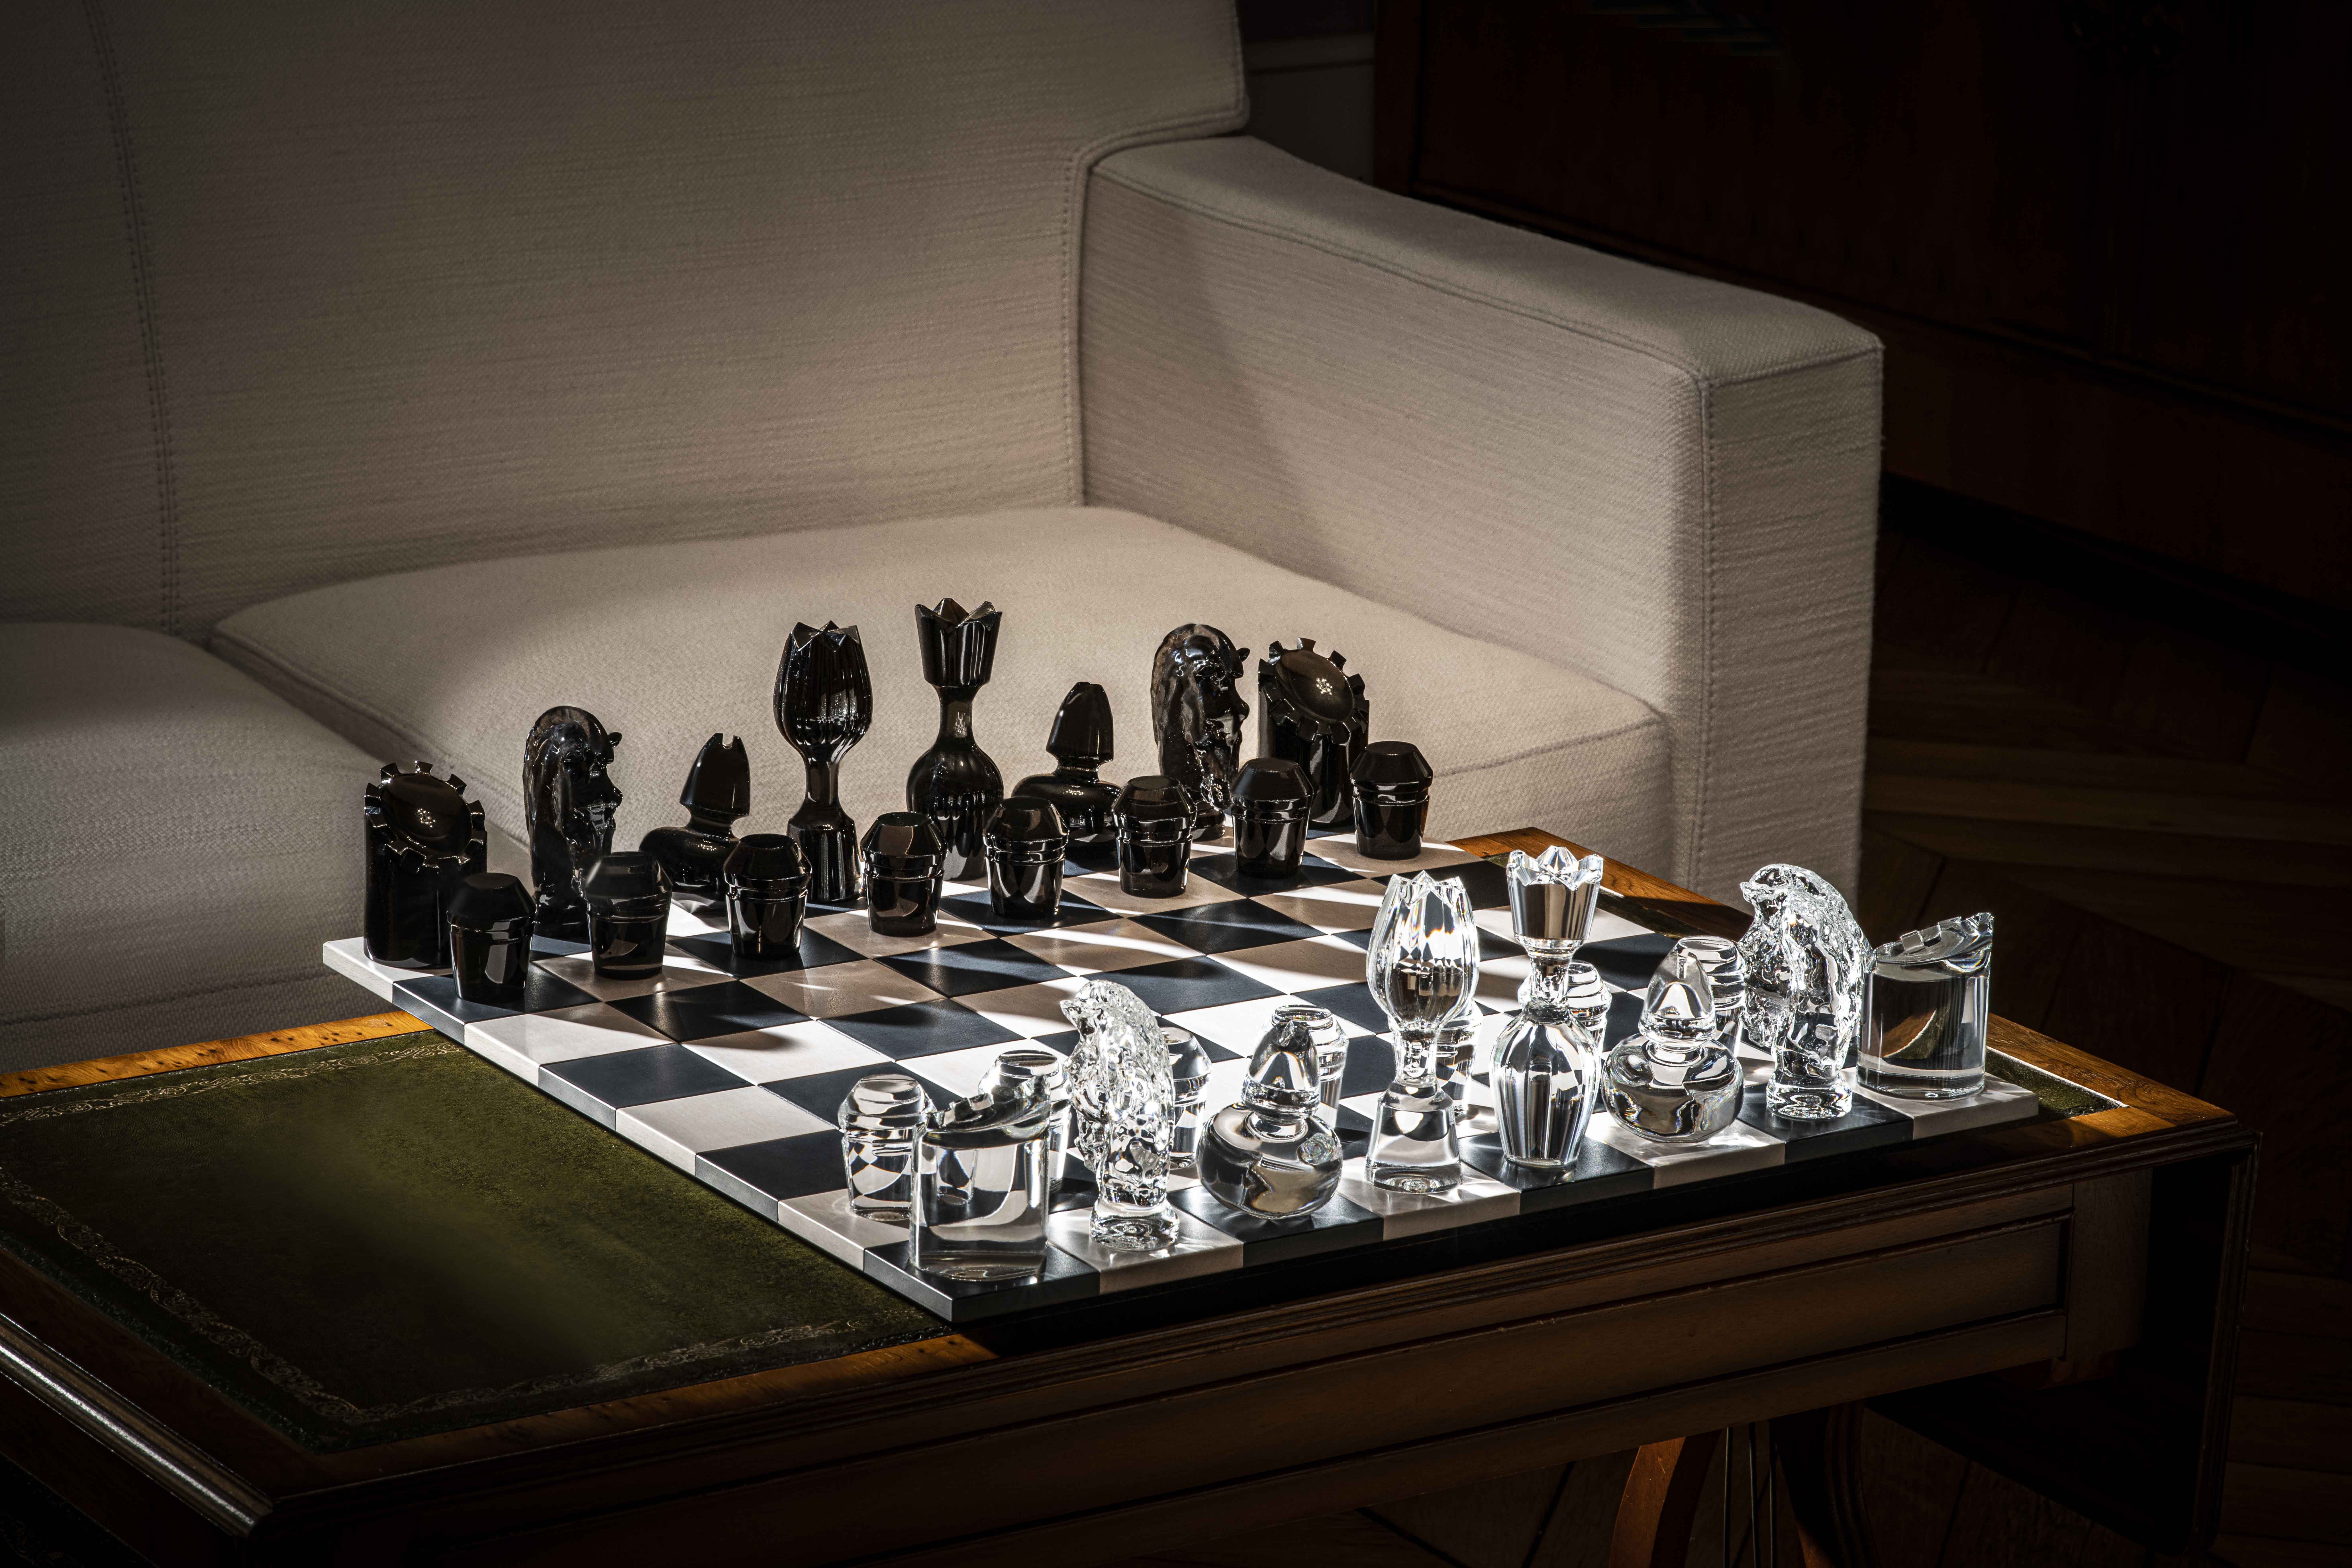 Saint-Louis Chess Game Jeu Flannel-Grey / Clear Crystal and Wood